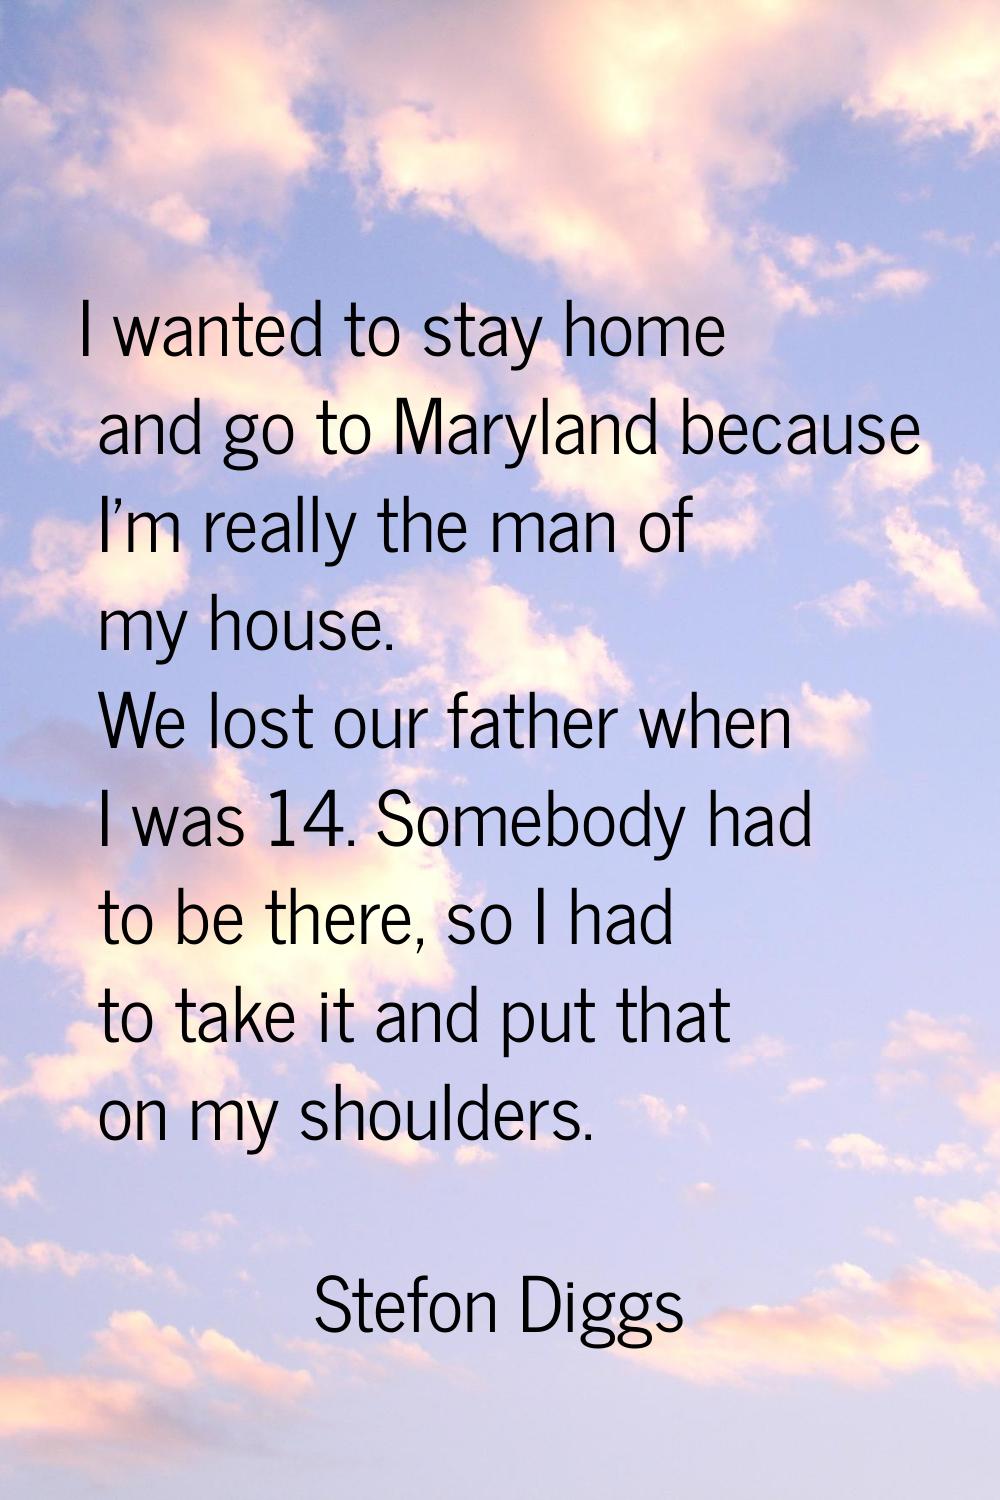 I wanted to stay home and go to Maryland because I'm really the man of my house. We lost our father